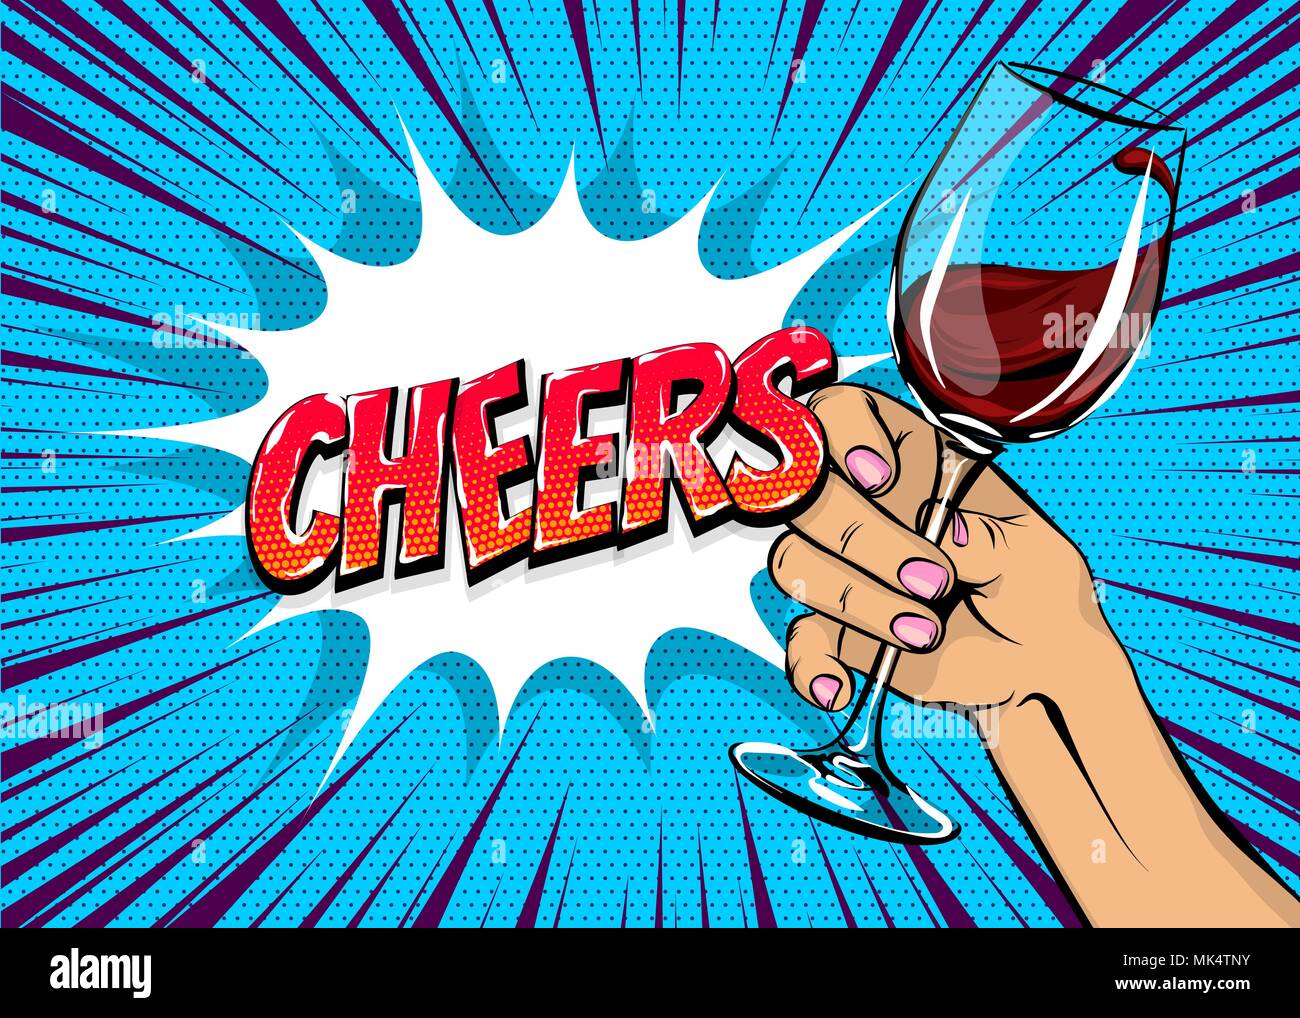 Pop art woman hand hold red wine glass vintage Stock Vector